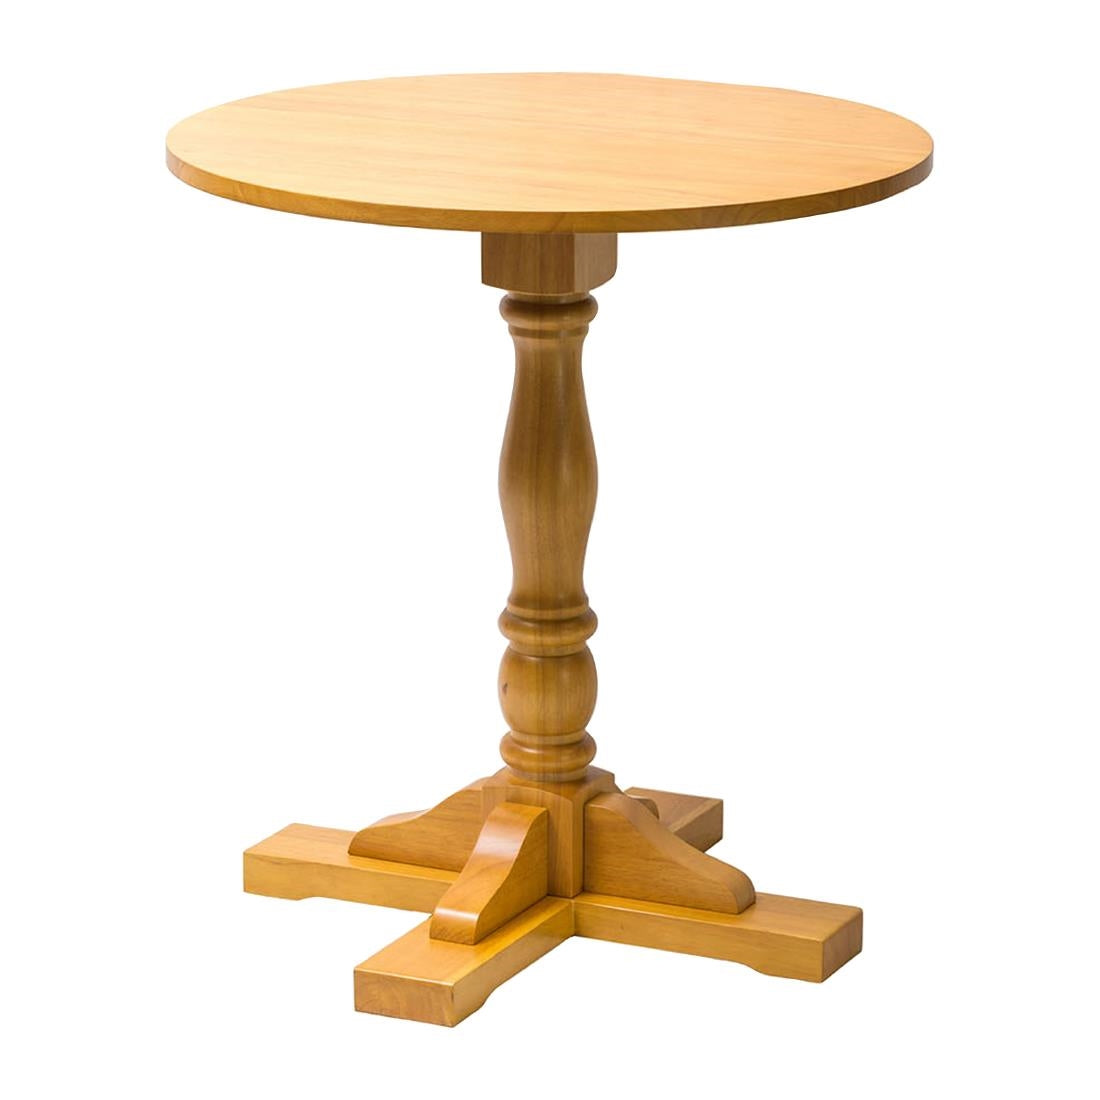 FT496 Oxford Soft Oak Pedestal Round Table 700mm JD Catering Equipment Solutions Ltd